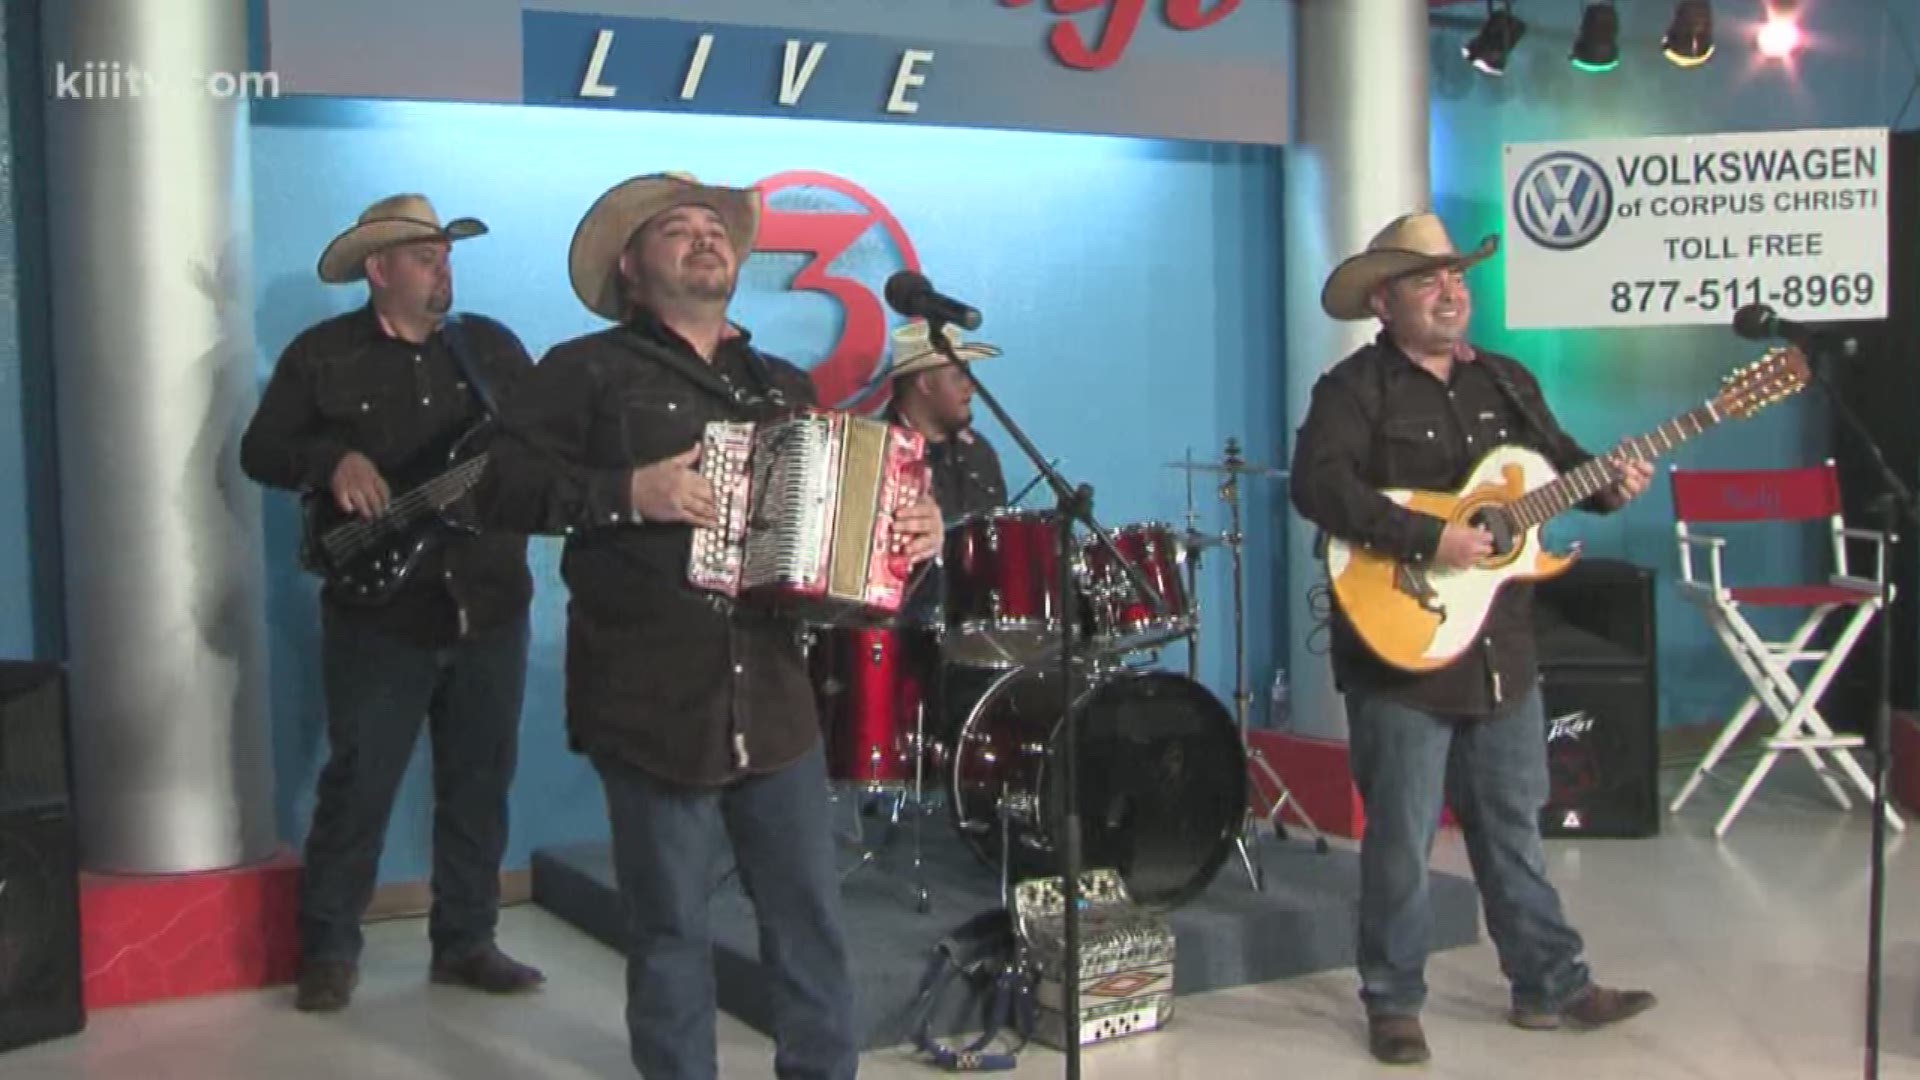 This Tejano Band based out of Brownsville, Texas, perform "Fue Tu Error" on Domingo Live.